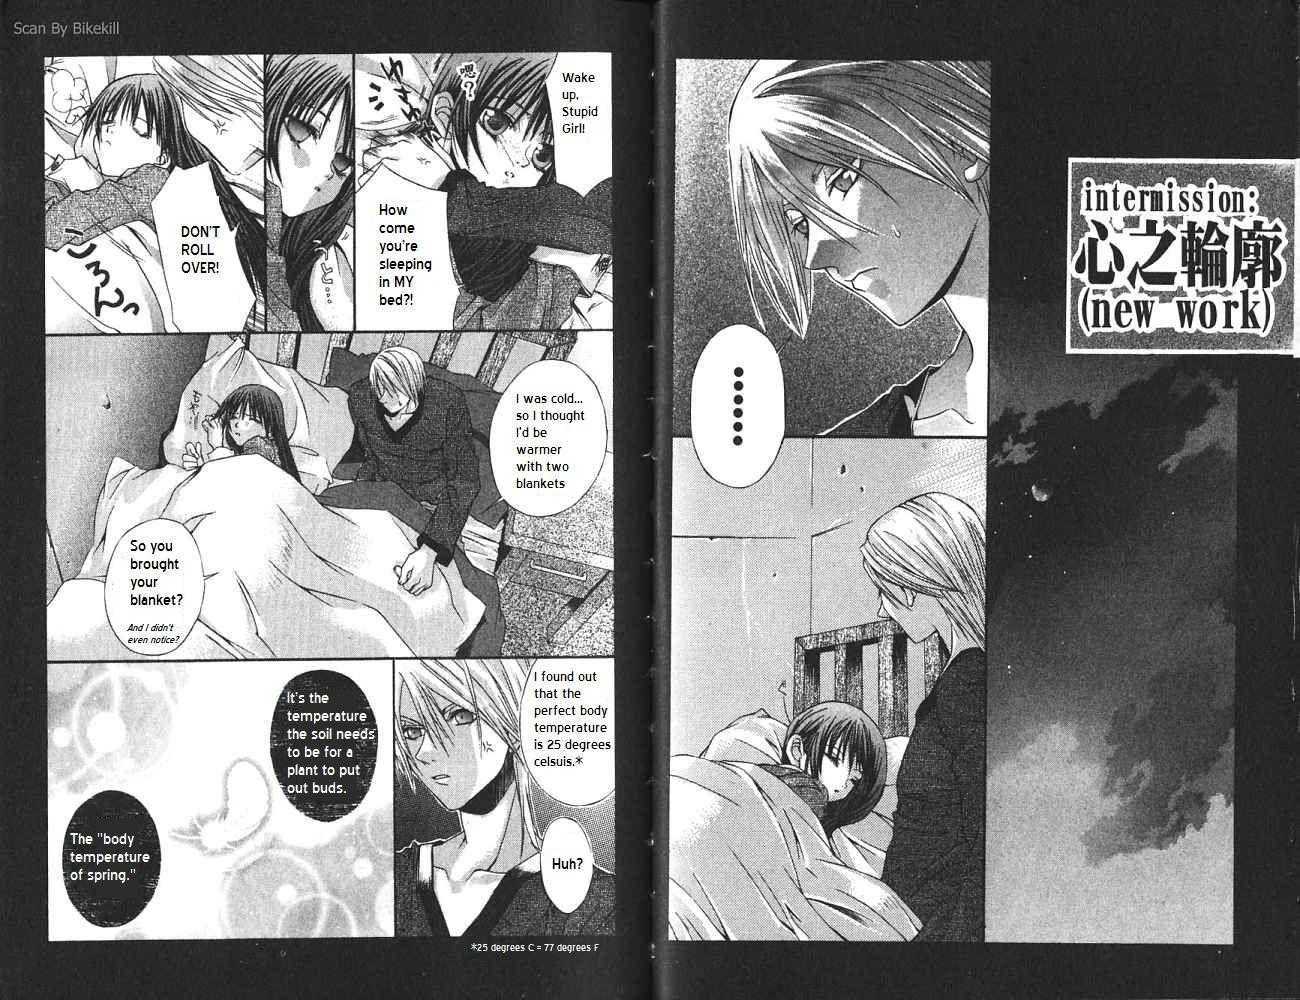 Hatenkou Yuugi Vol.1 Chapter 7.5 : Intermission: (New Work) - Picture 1